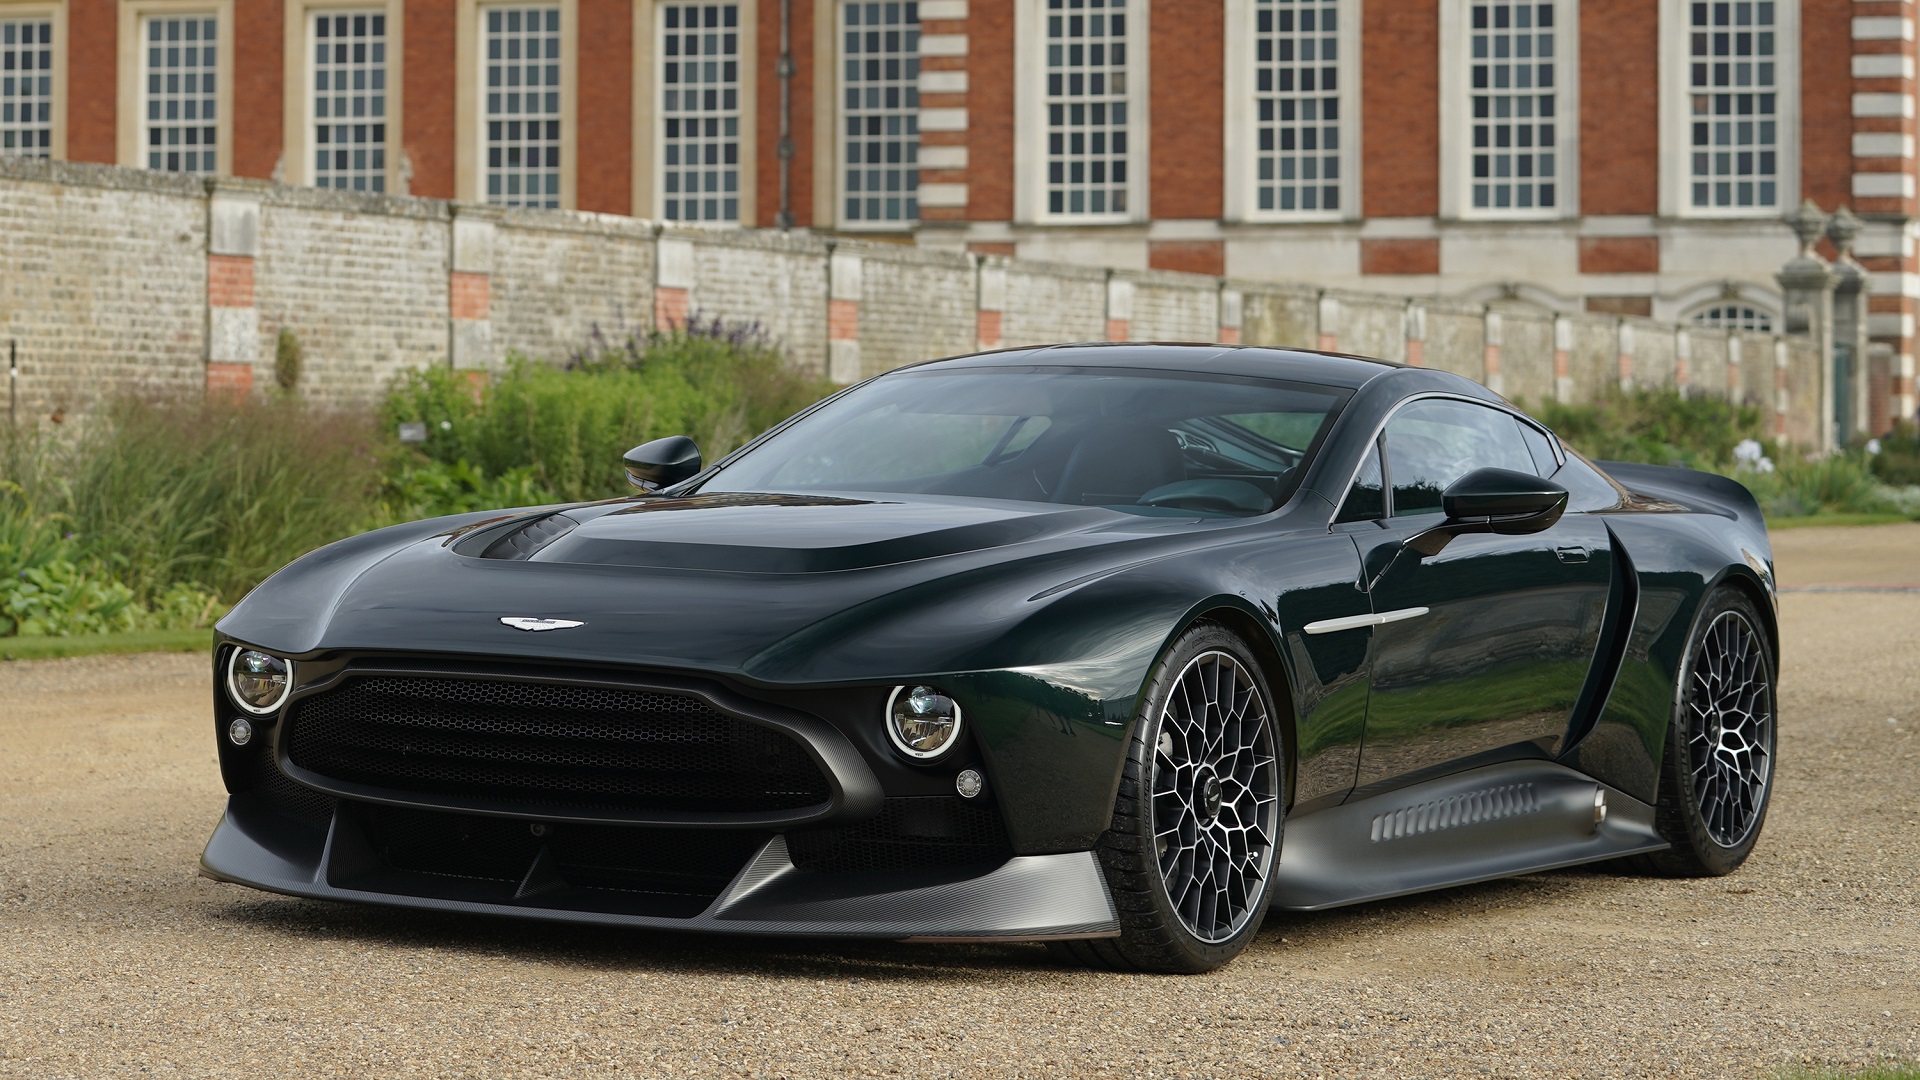 Front-angled shot of the bespoke Aston Martin Victor finished with a dark green coat.